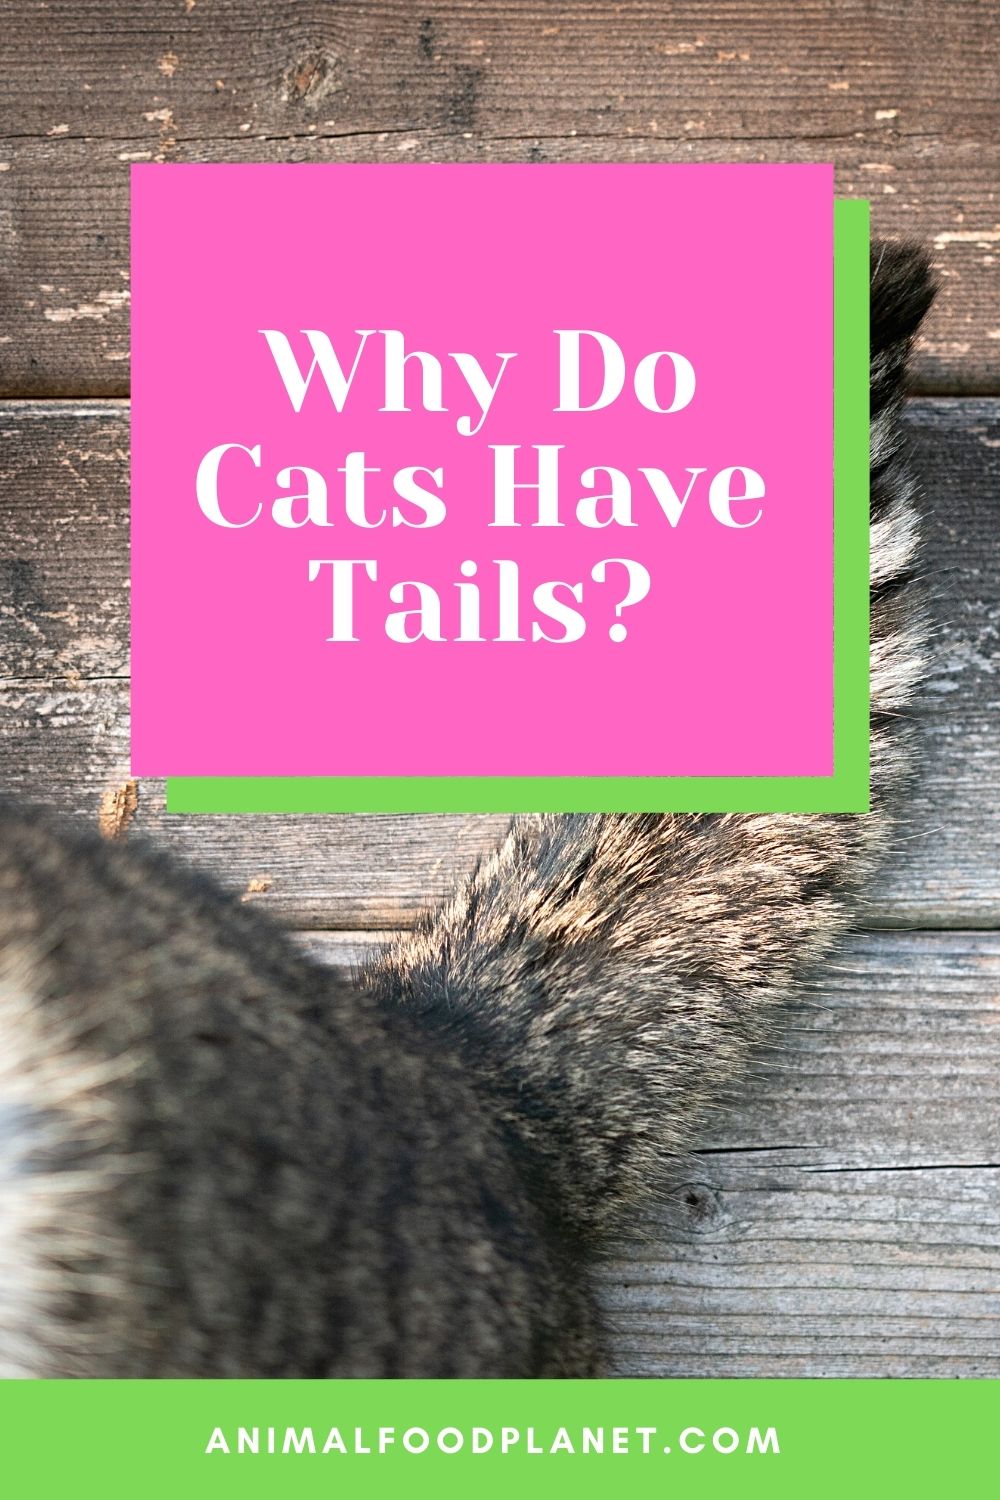 Why Do Cats Have Tails